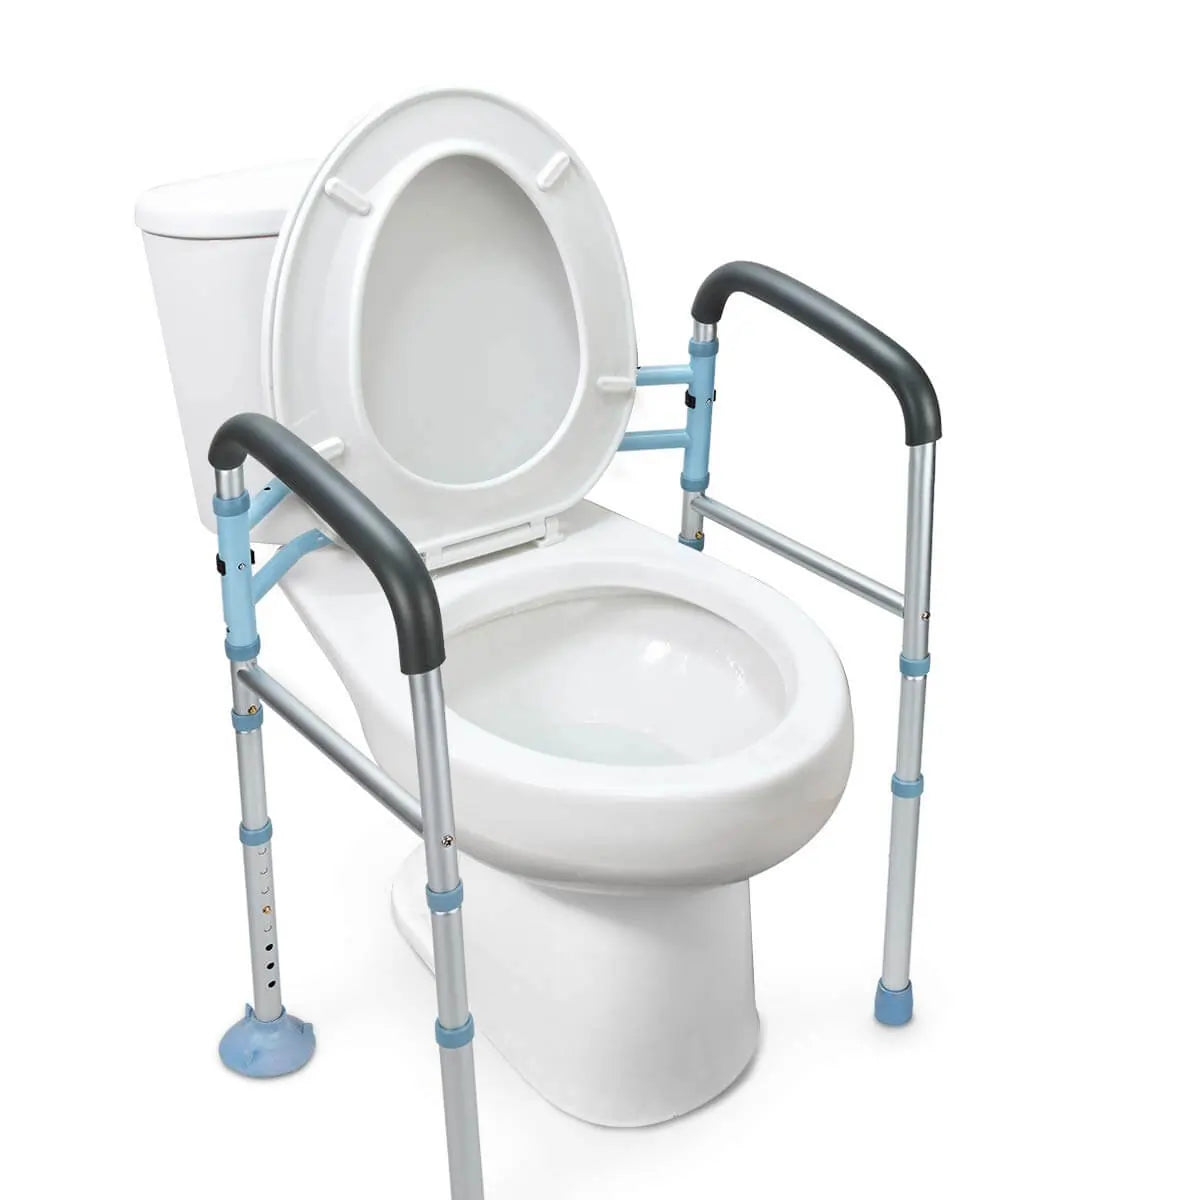 300LBS Capacity Stand Alone Toilet Safety Rail